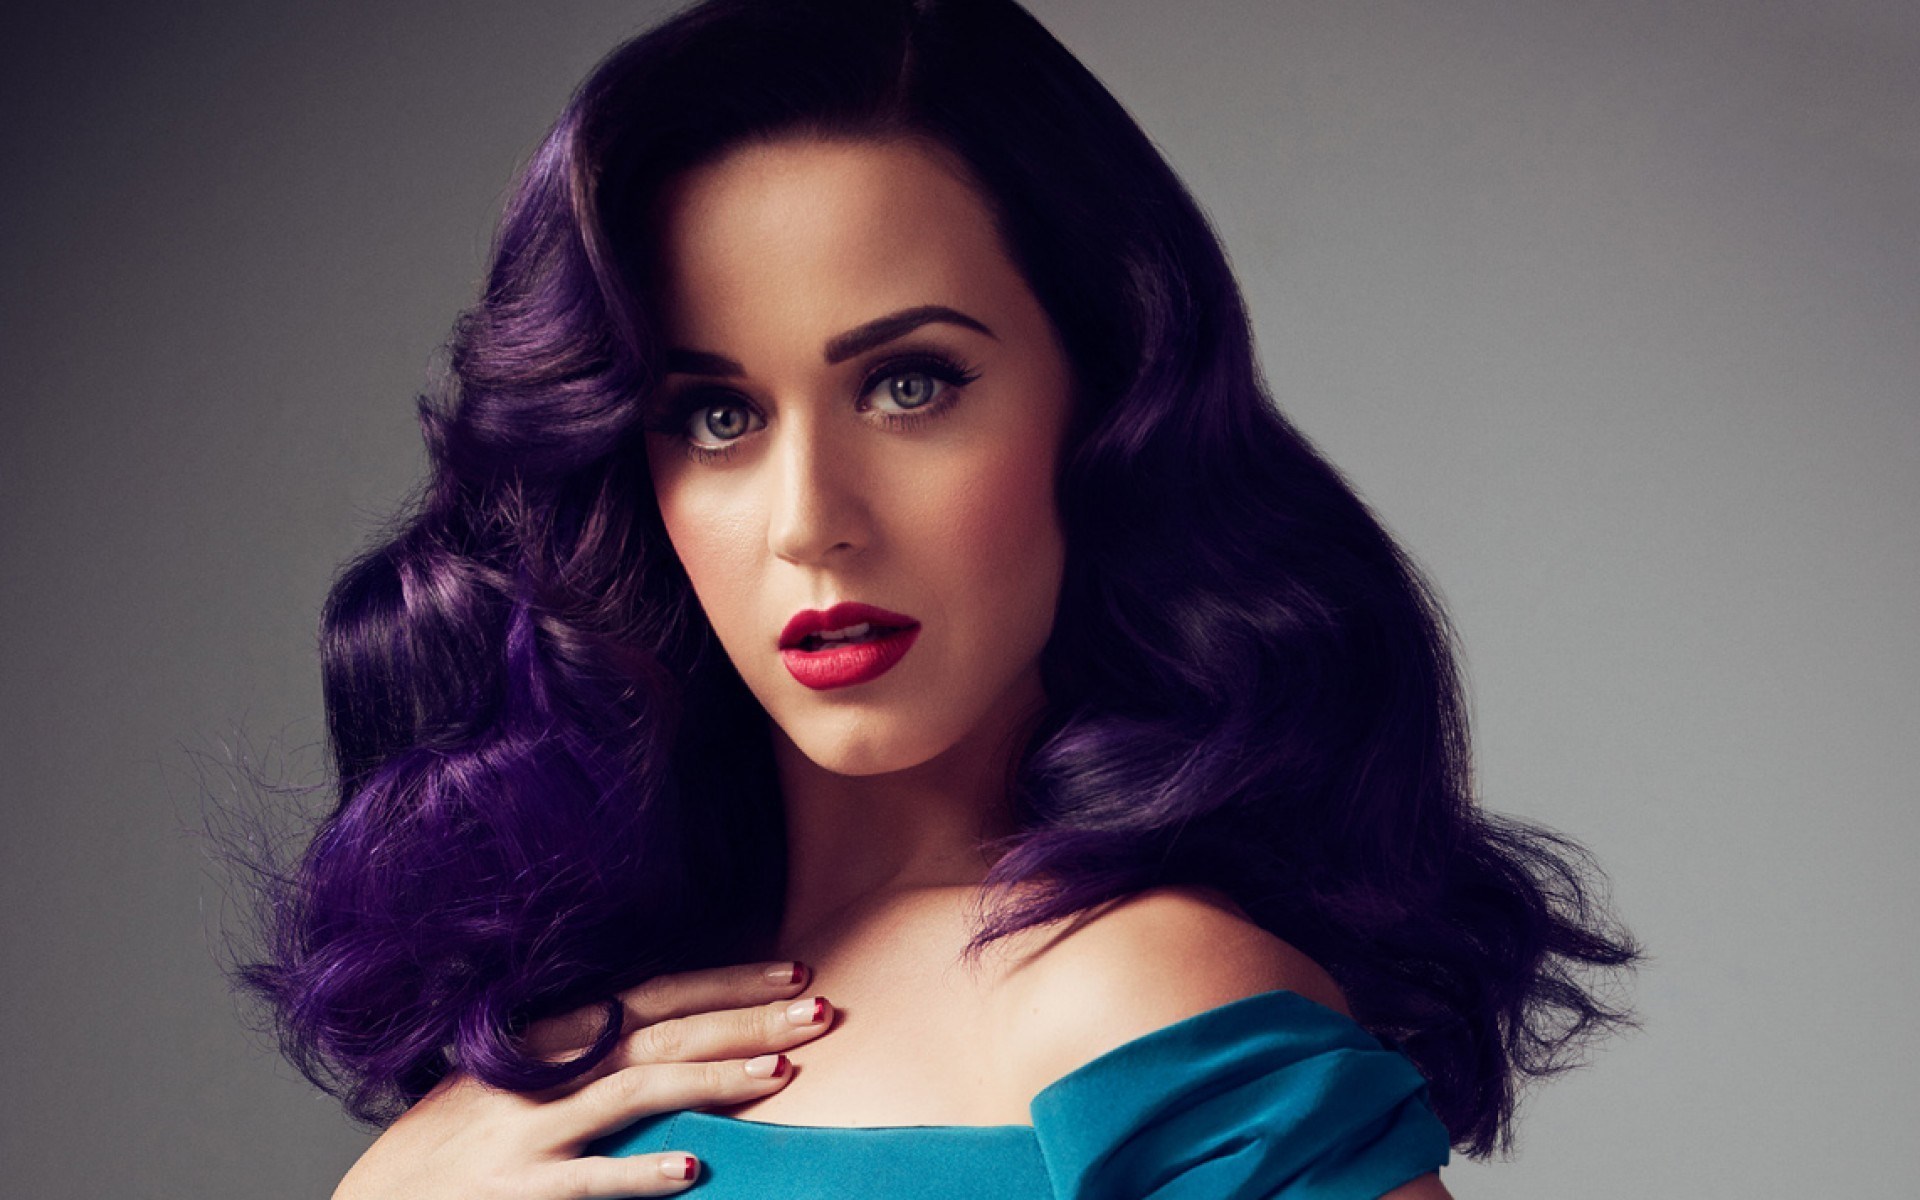 Beauty Actress Singer Katy Perry